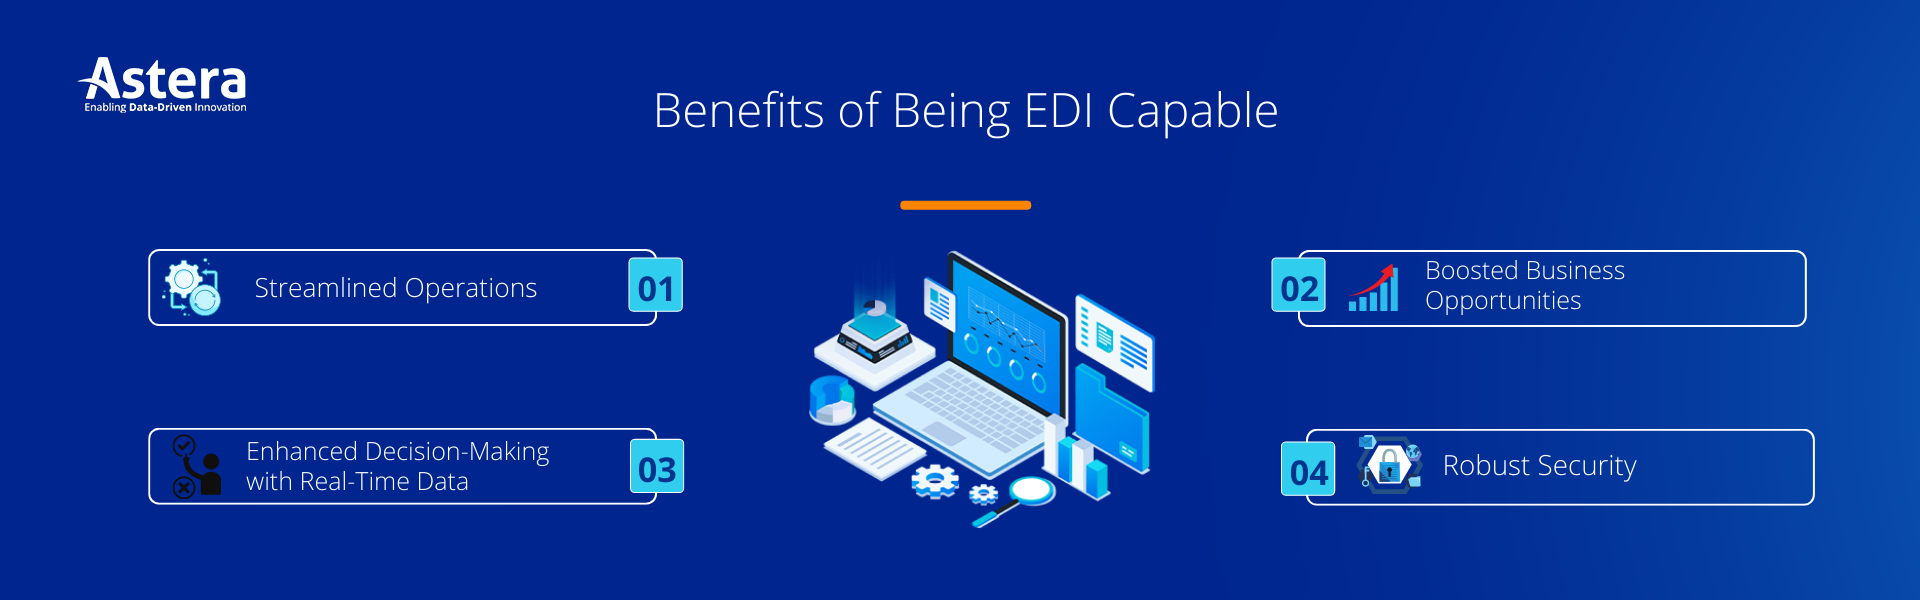 Benefits of Being EDI Capable